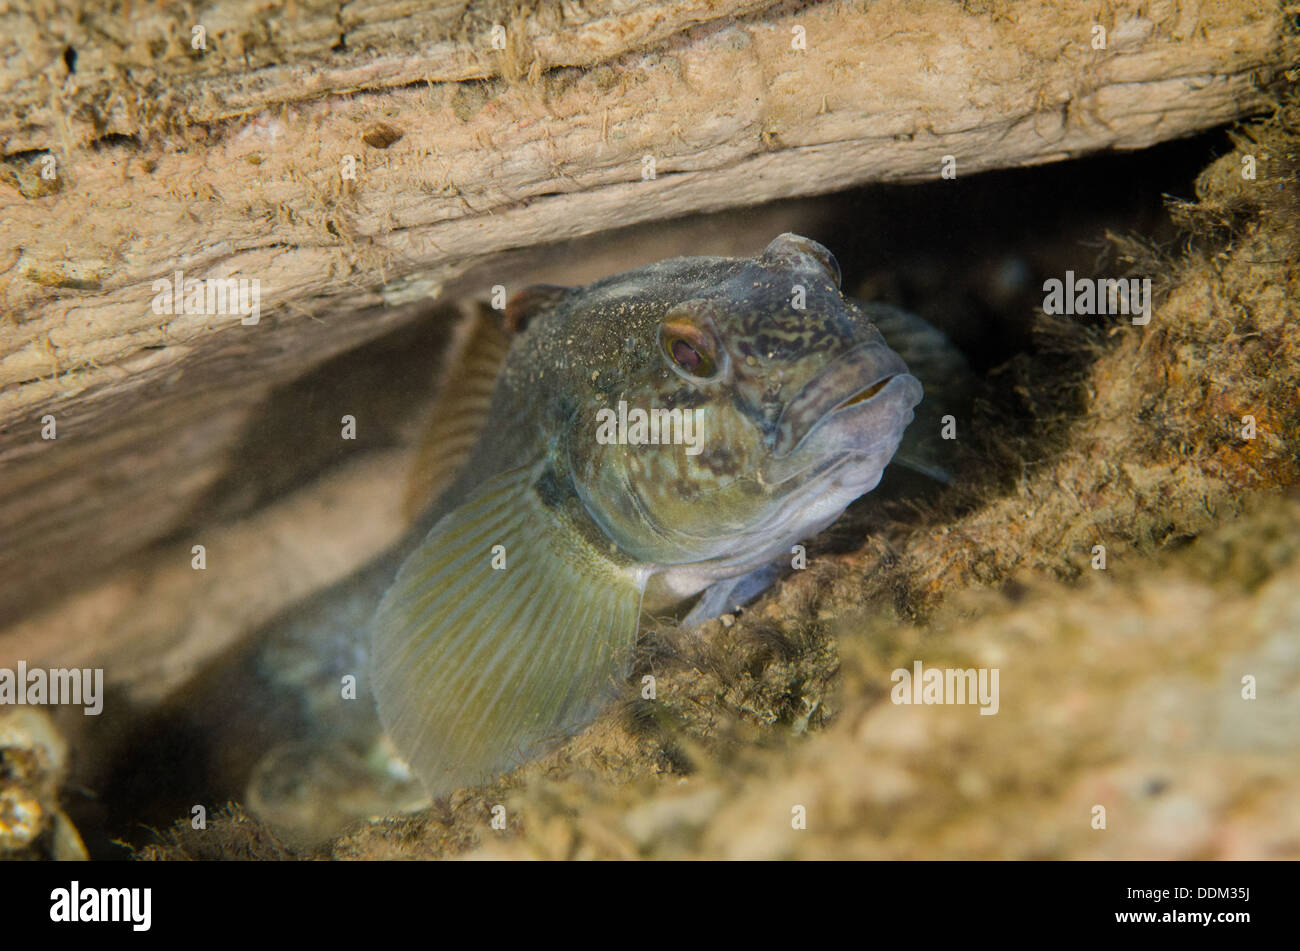 A Round Gobi, Neogobius melanostomus,  peers out from a hiding place. Stock Photo